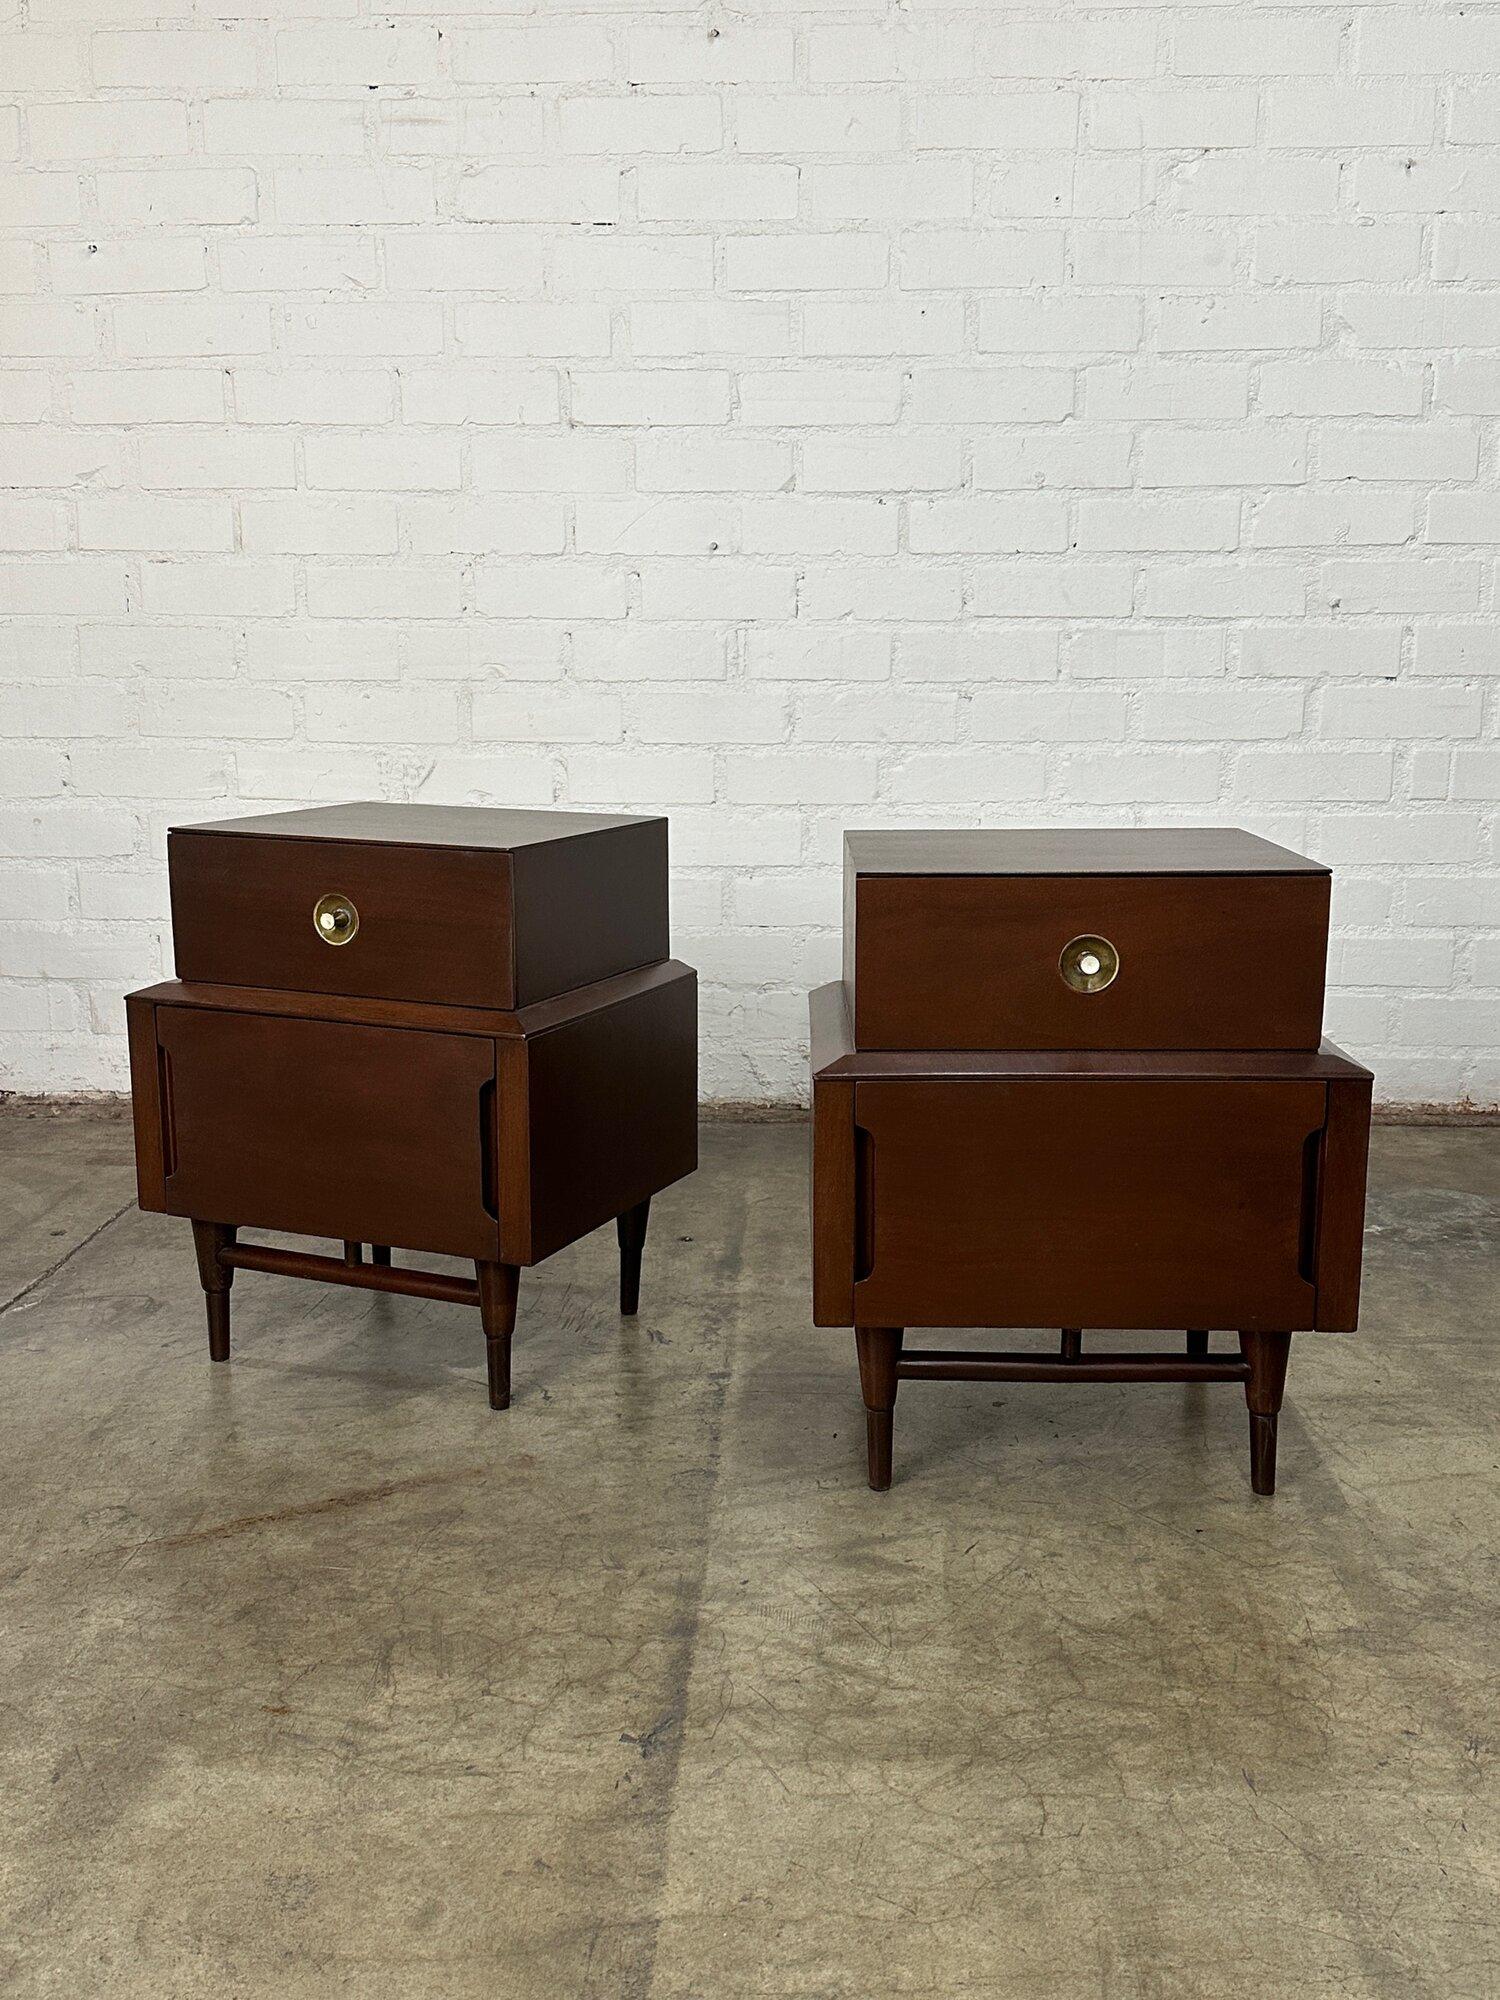 W20 D16 H24.5 Top Width17

Mid Century Modern Mahogany nightstands on a stretcher base, refinished in a walnut stain. Each nightstand has two drawers, the top drawer features one brass knob, and the bottom drawer has recessed pulls on both sides of